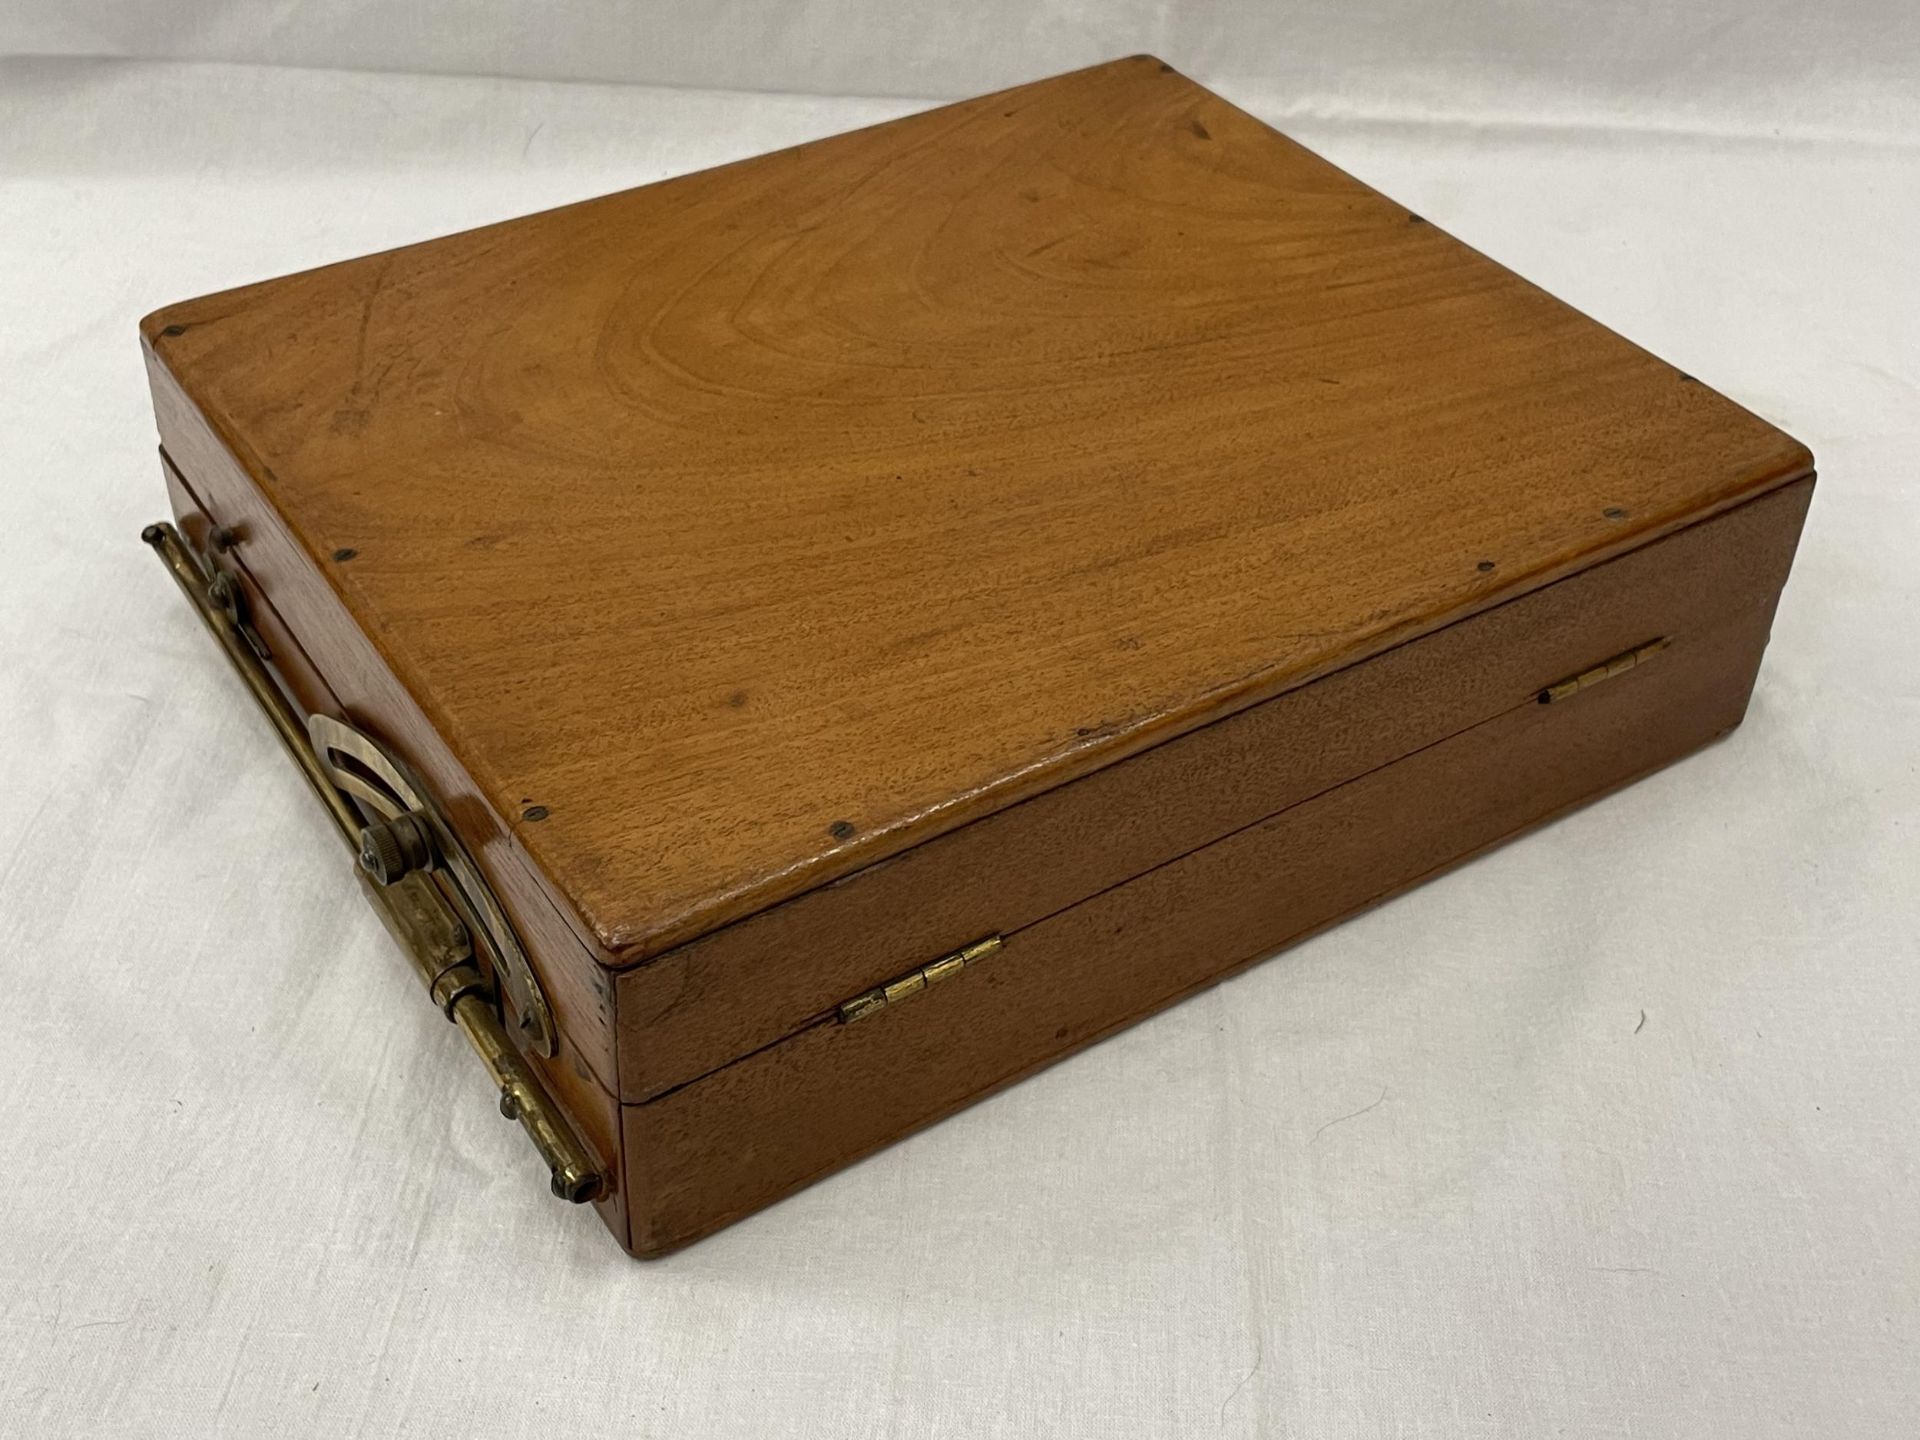 A 19TH CENTURY ARTIST'S FOLDING PAINTING BOX - Image 6 of 6